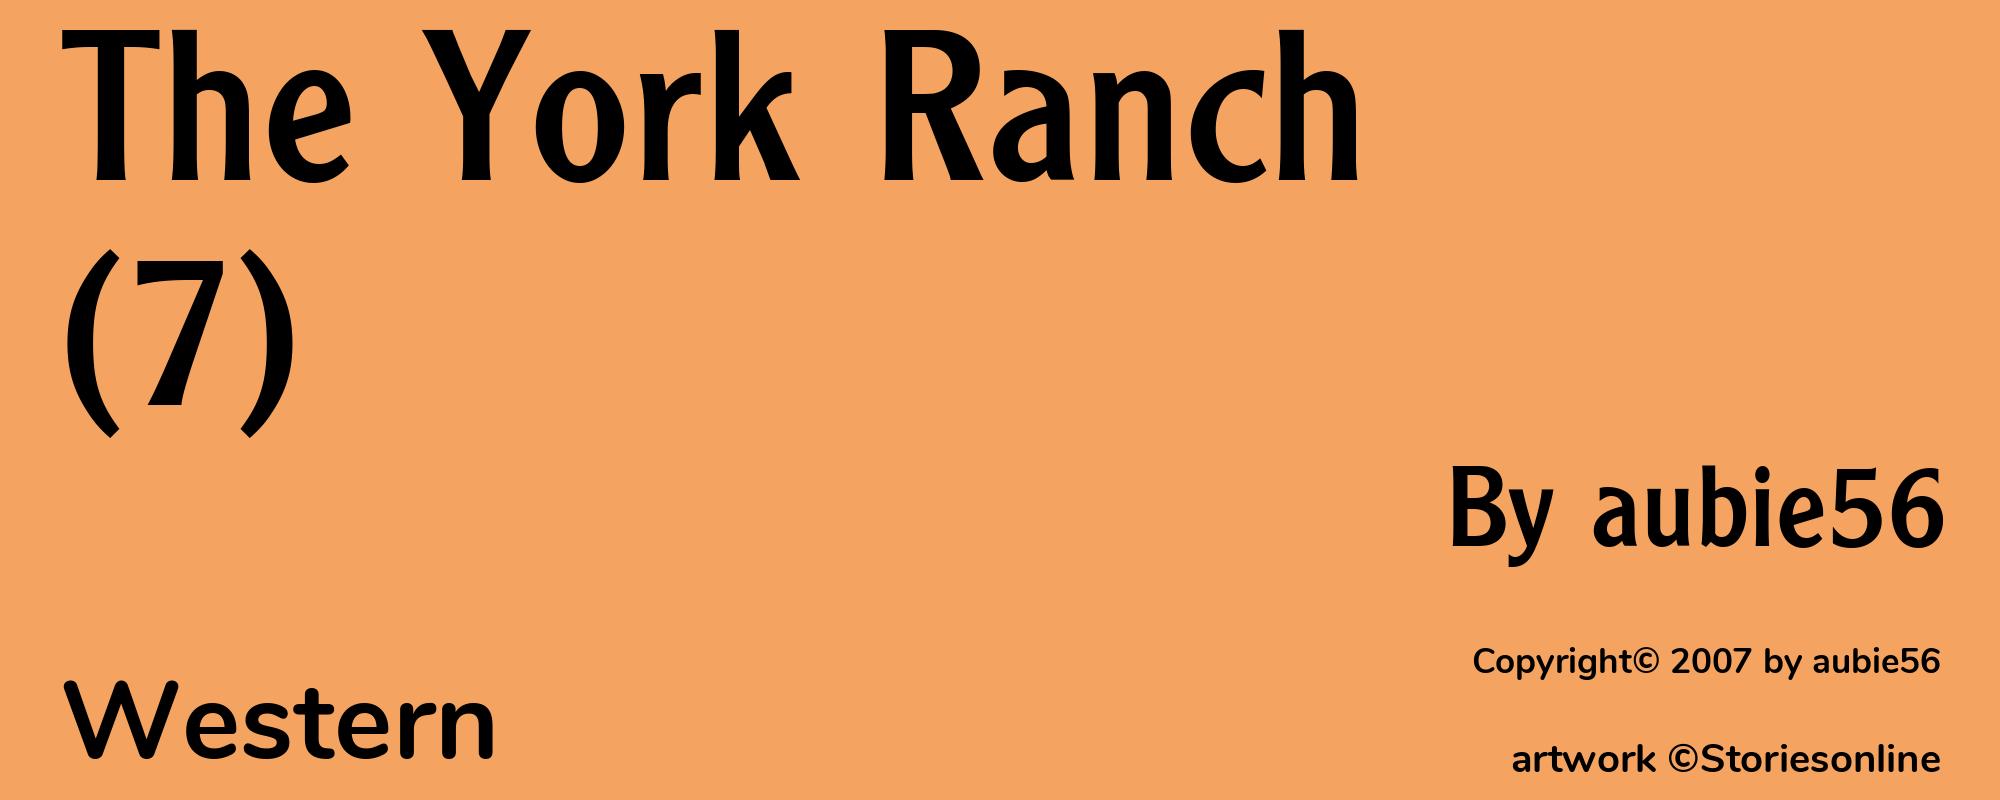 The York Ranch(7) - Cover